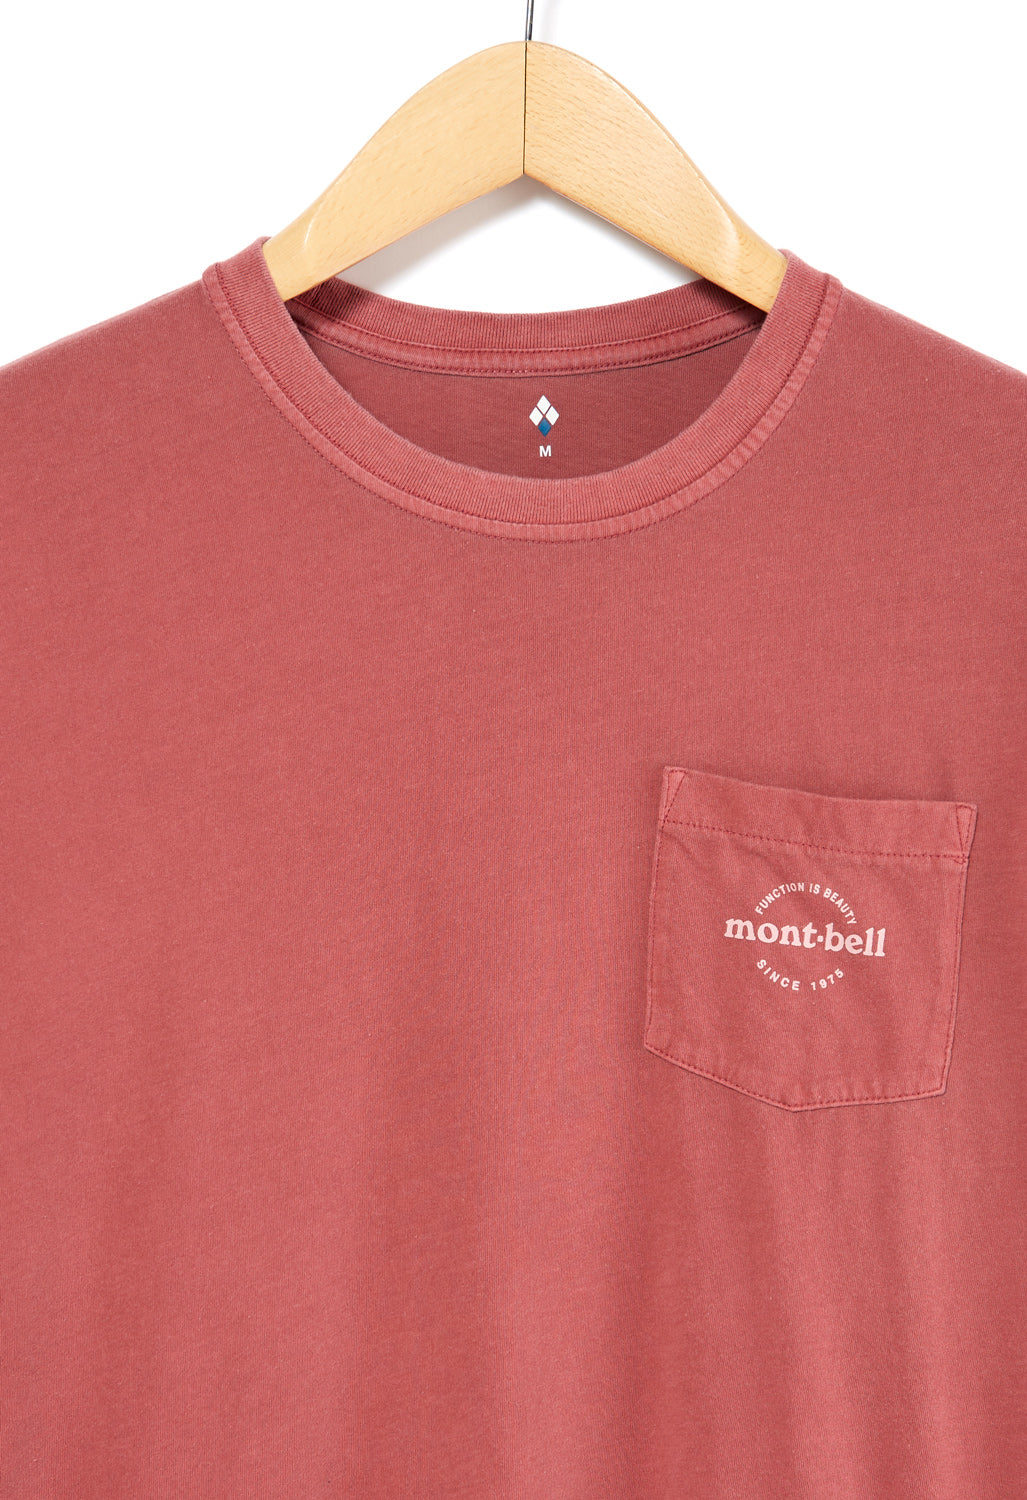 Montbell Men's Wash Out Cotton T-Shirt - Red